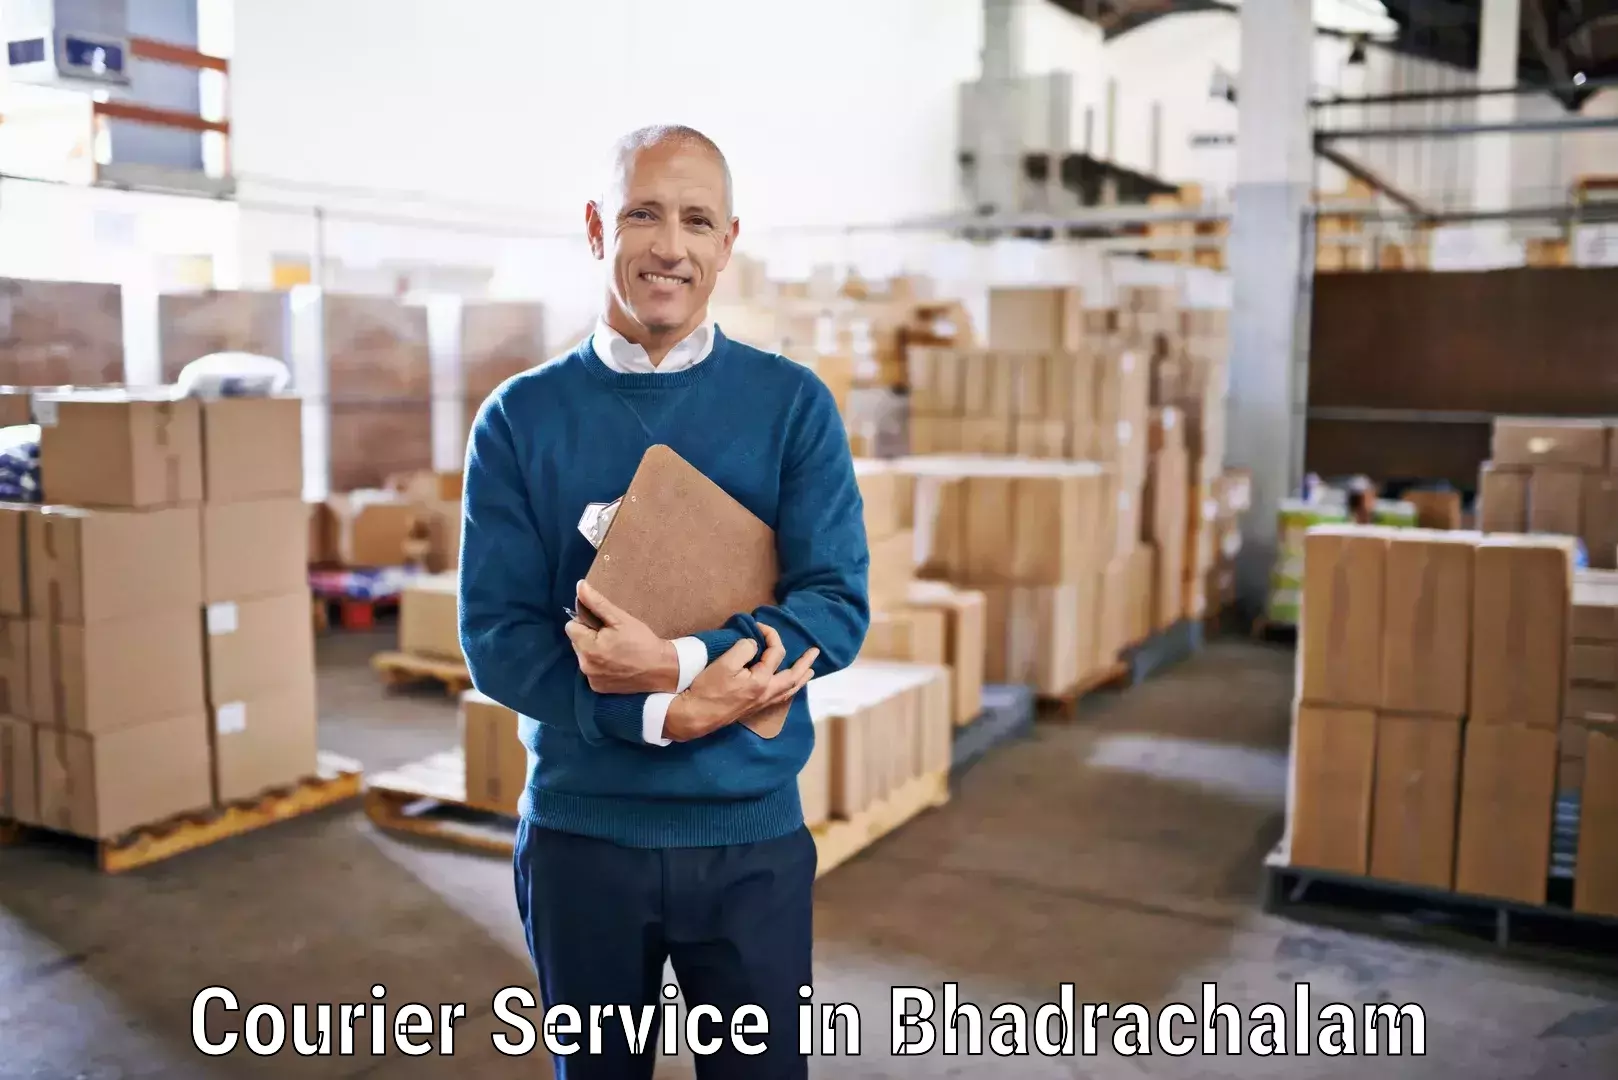 Customer-friendly courier services in Bhadrachalam